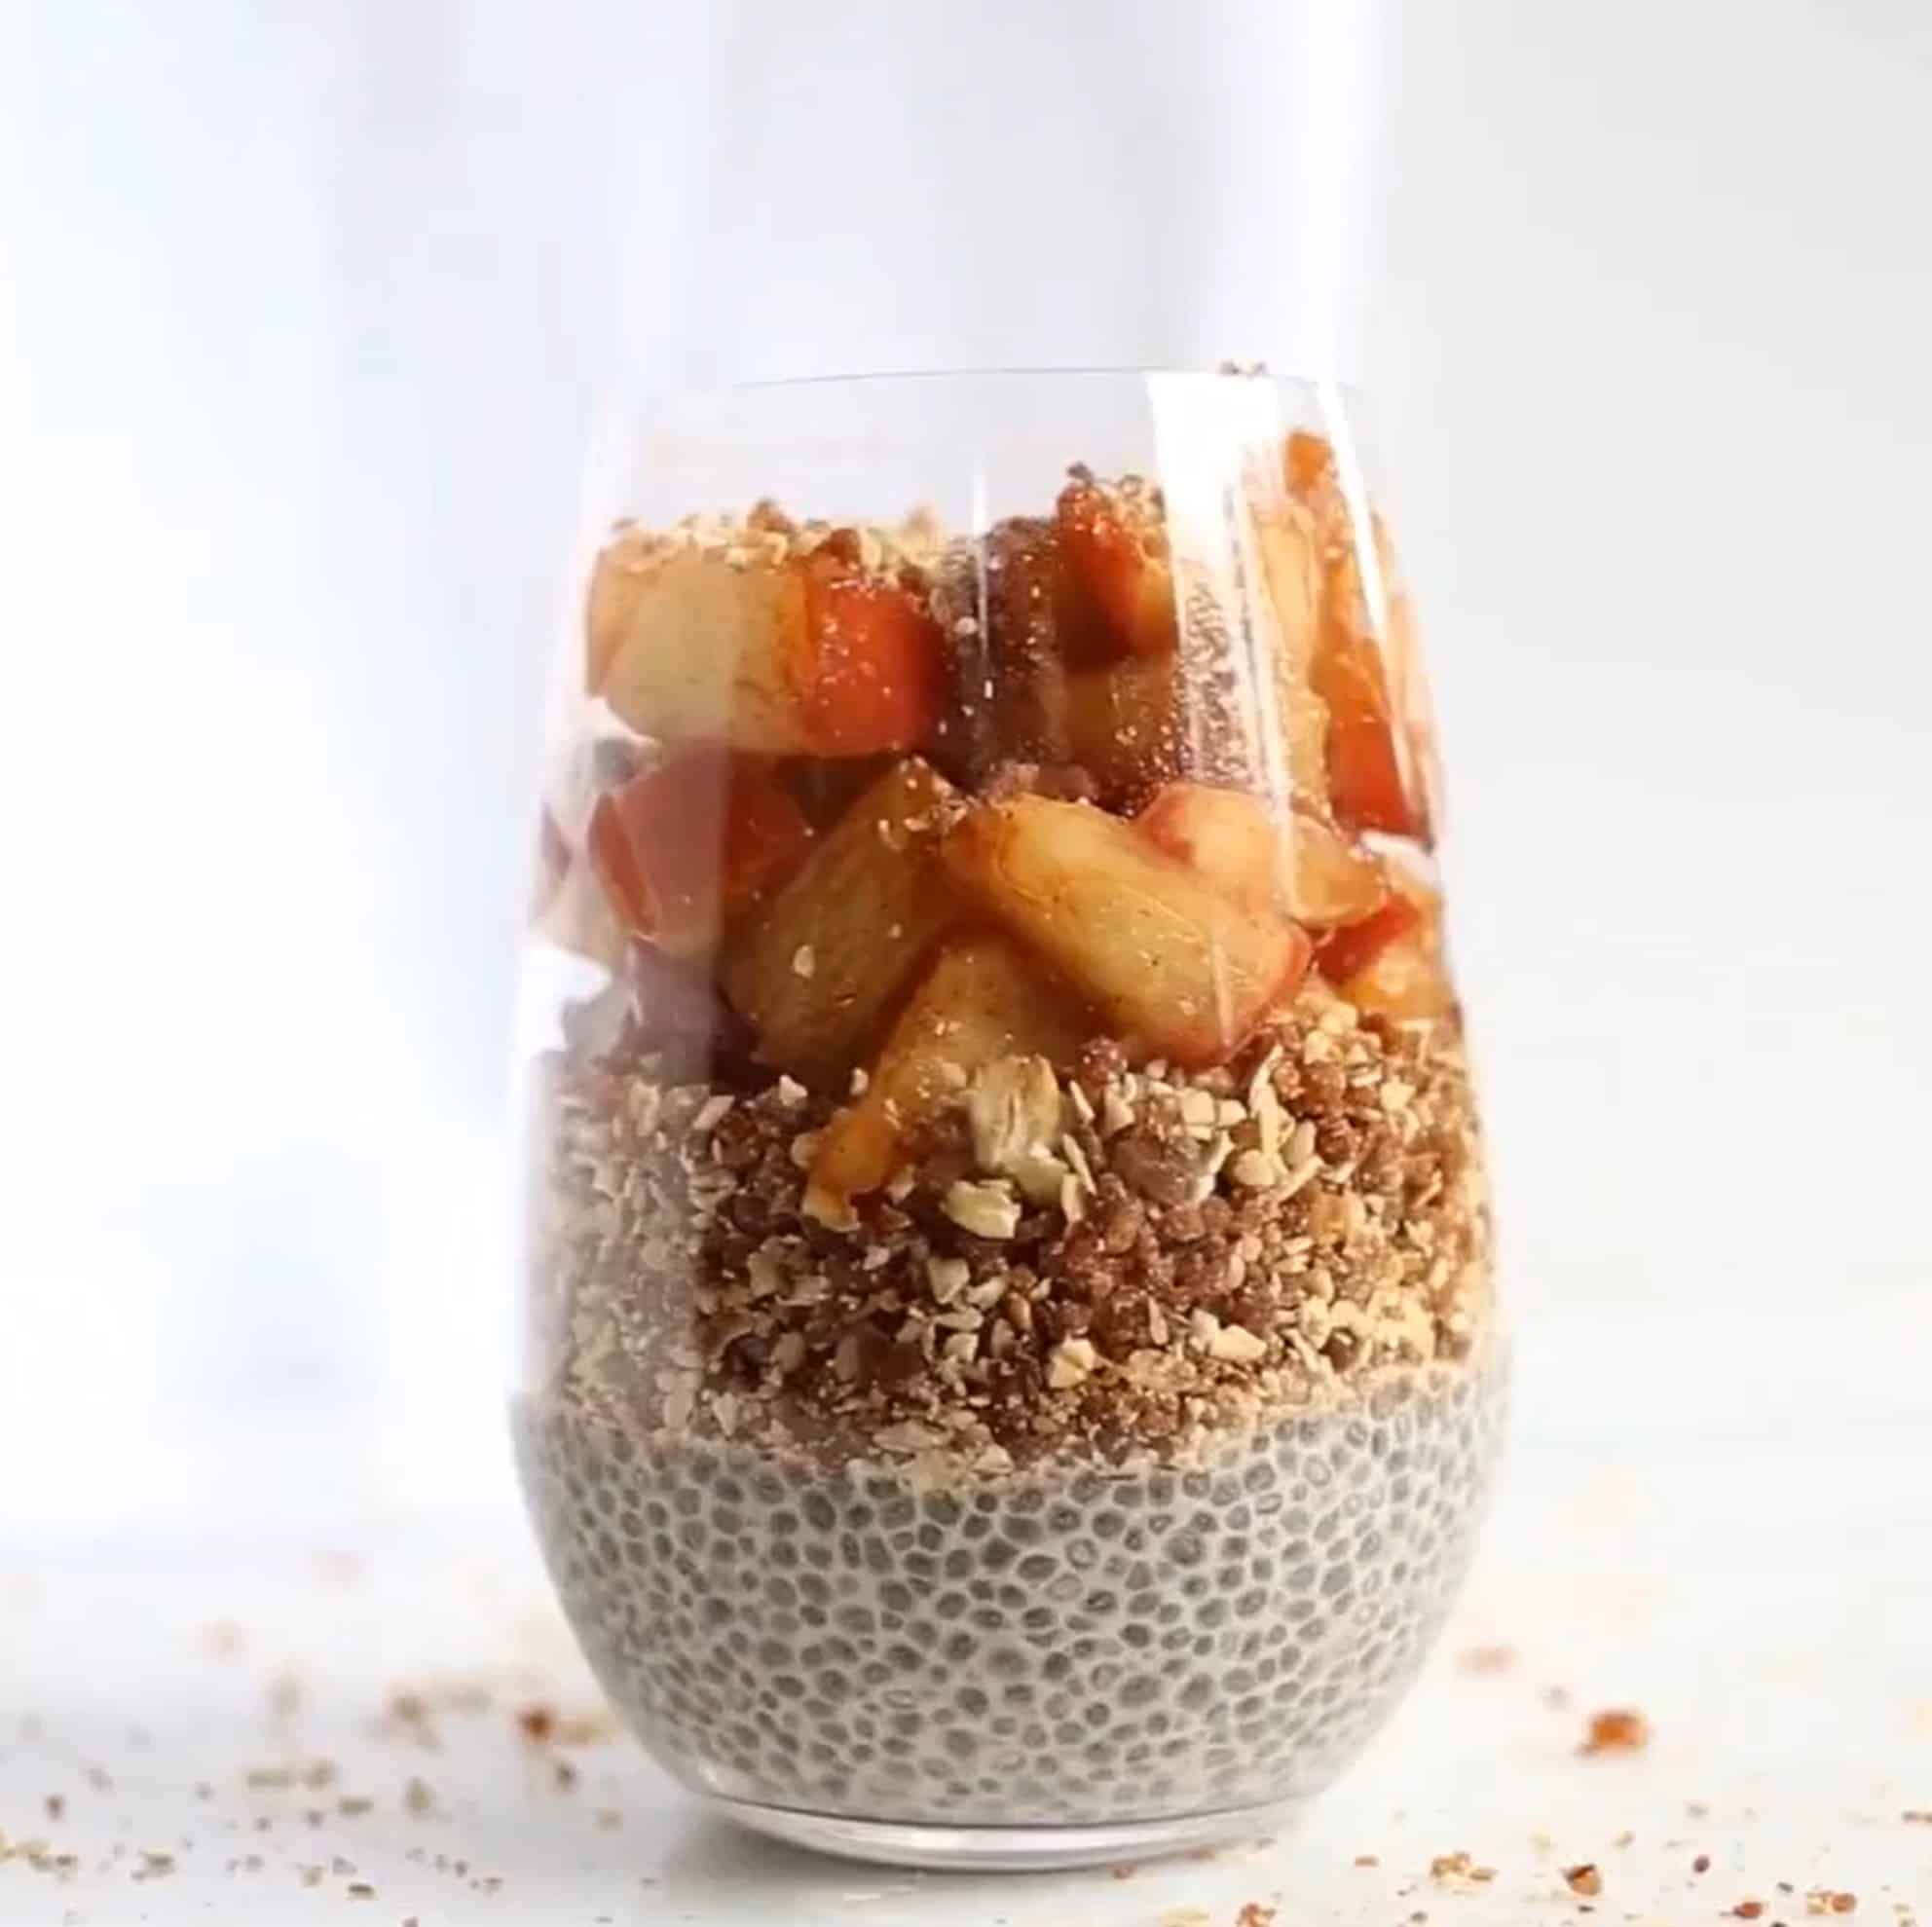 Peach Pie Breakfast Parfait is literally dessert for breakfast but it is healthy! what could be better than that? 21 day weight loss program can help to learn how to eat this special way and still be healthy. You will lose weight too.